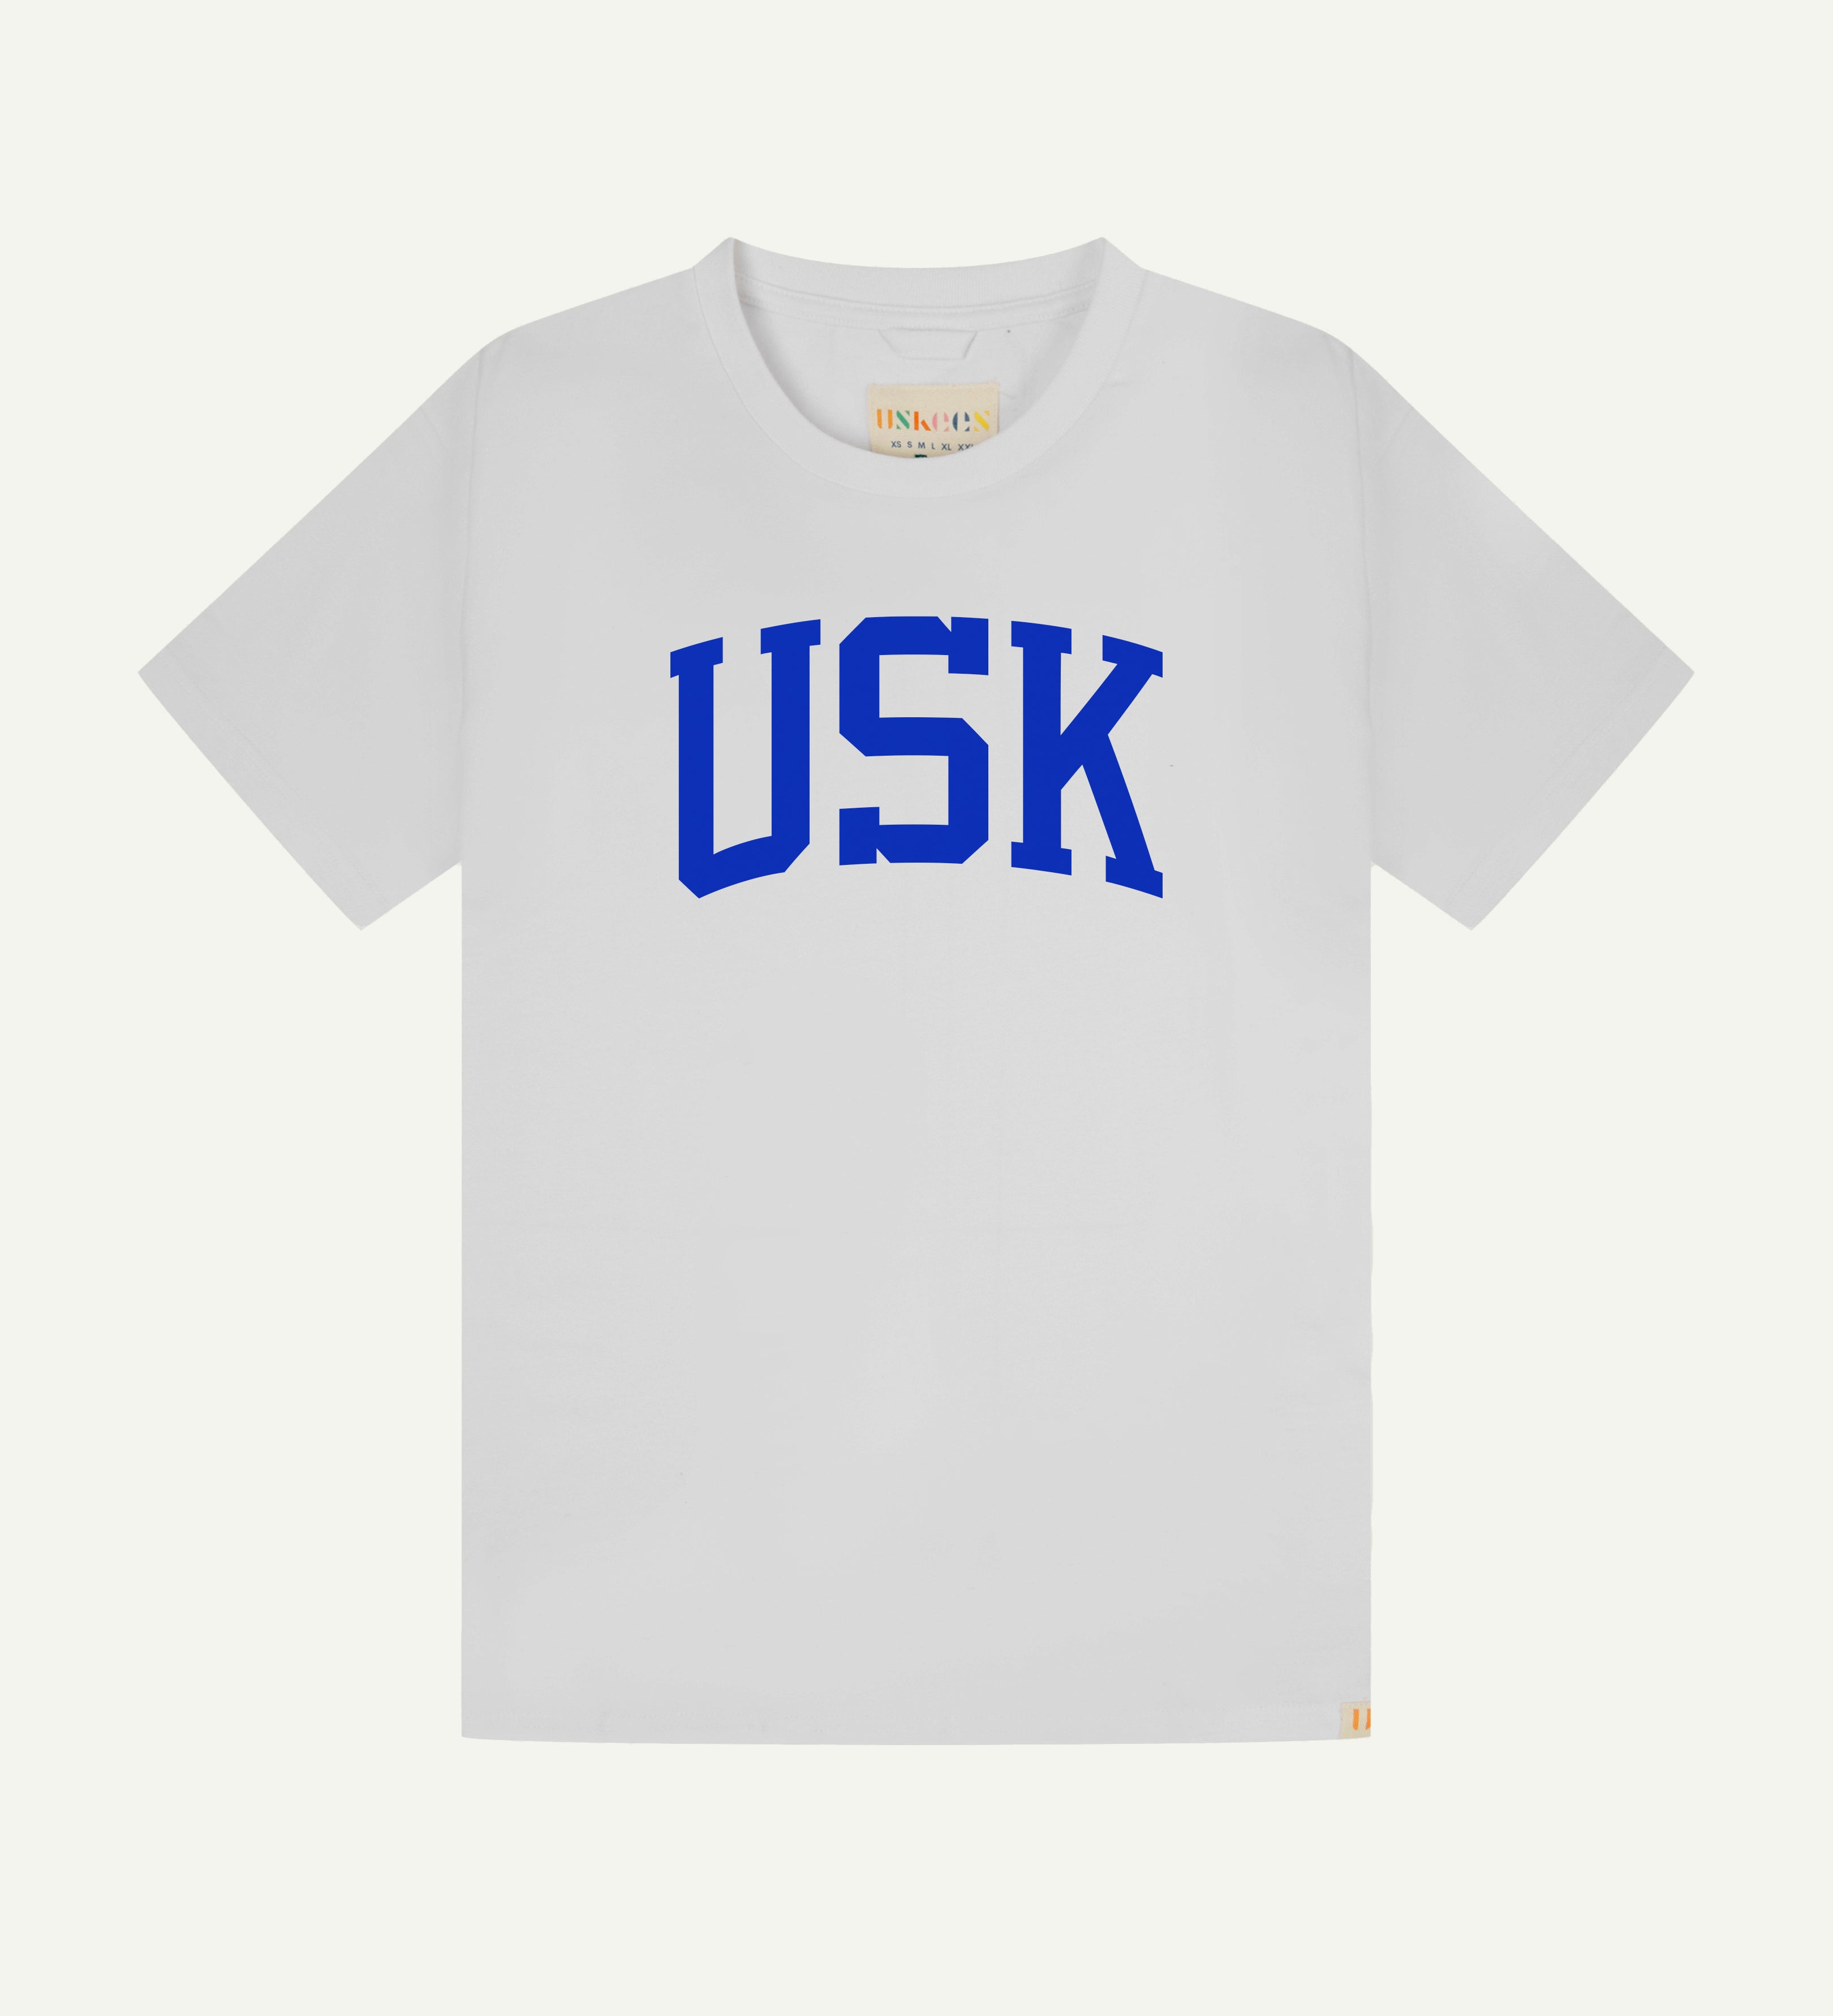 Flat shot of front of men's white short sleeve t-shirt with the signature USK logo on the front in blue.